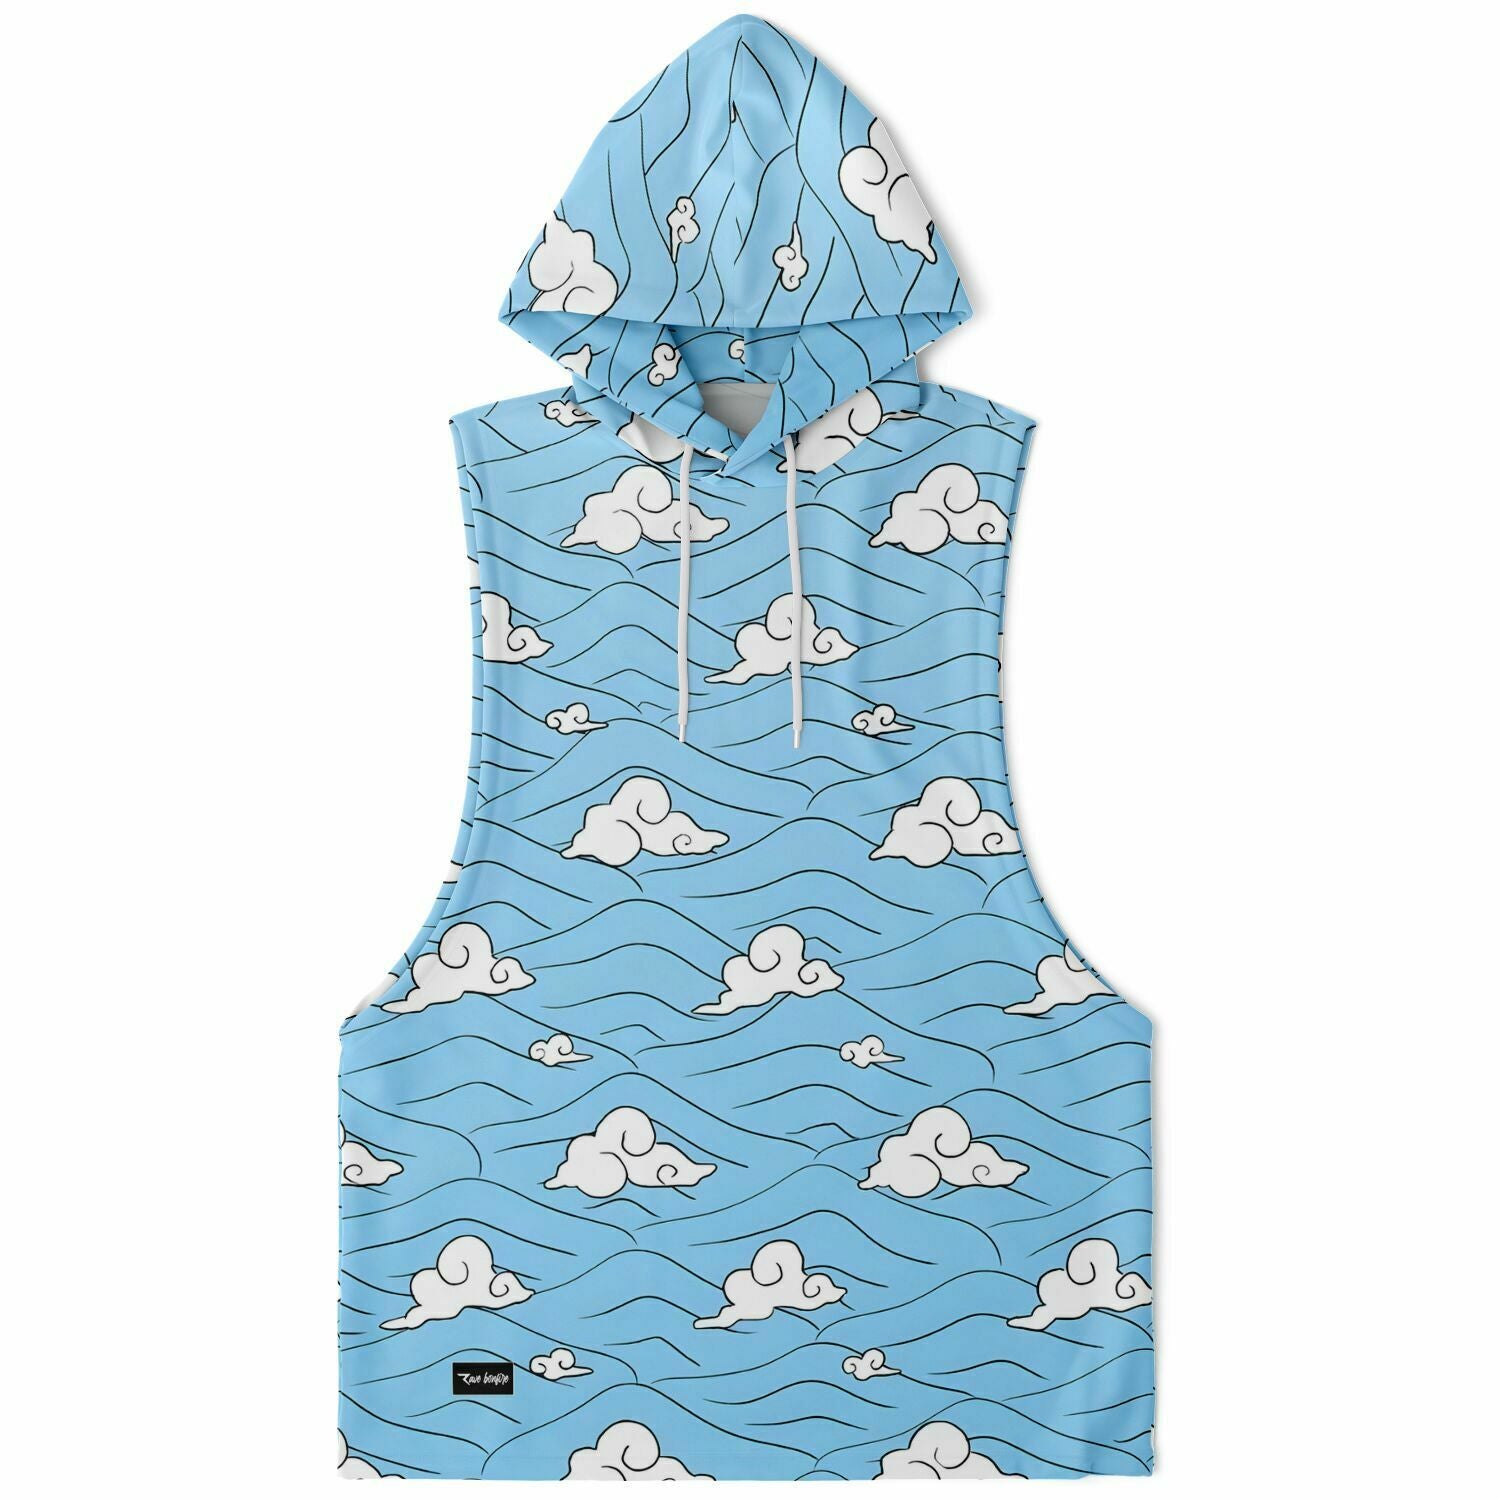 A Rave daddy sleeveless hoodie with clouds on it.